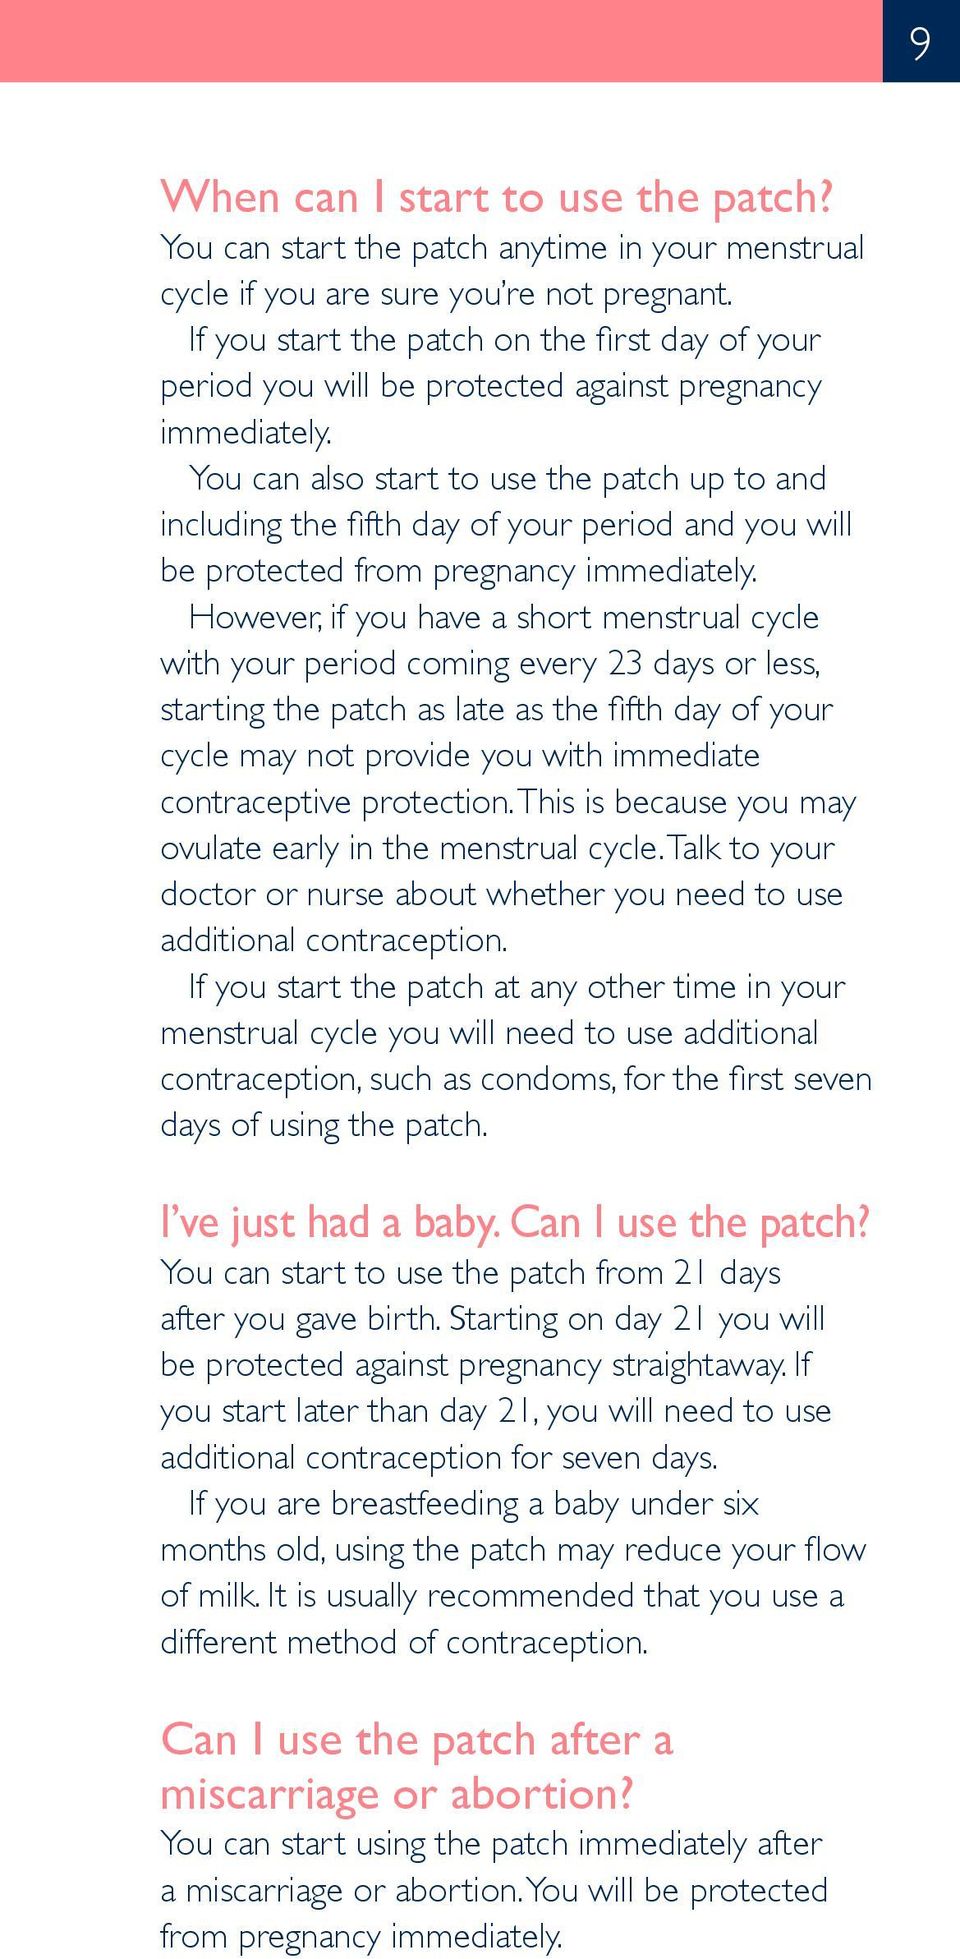 You can also start to use the patch up to and including the fifth day of your period and you will be protected from pregnancy immediately.